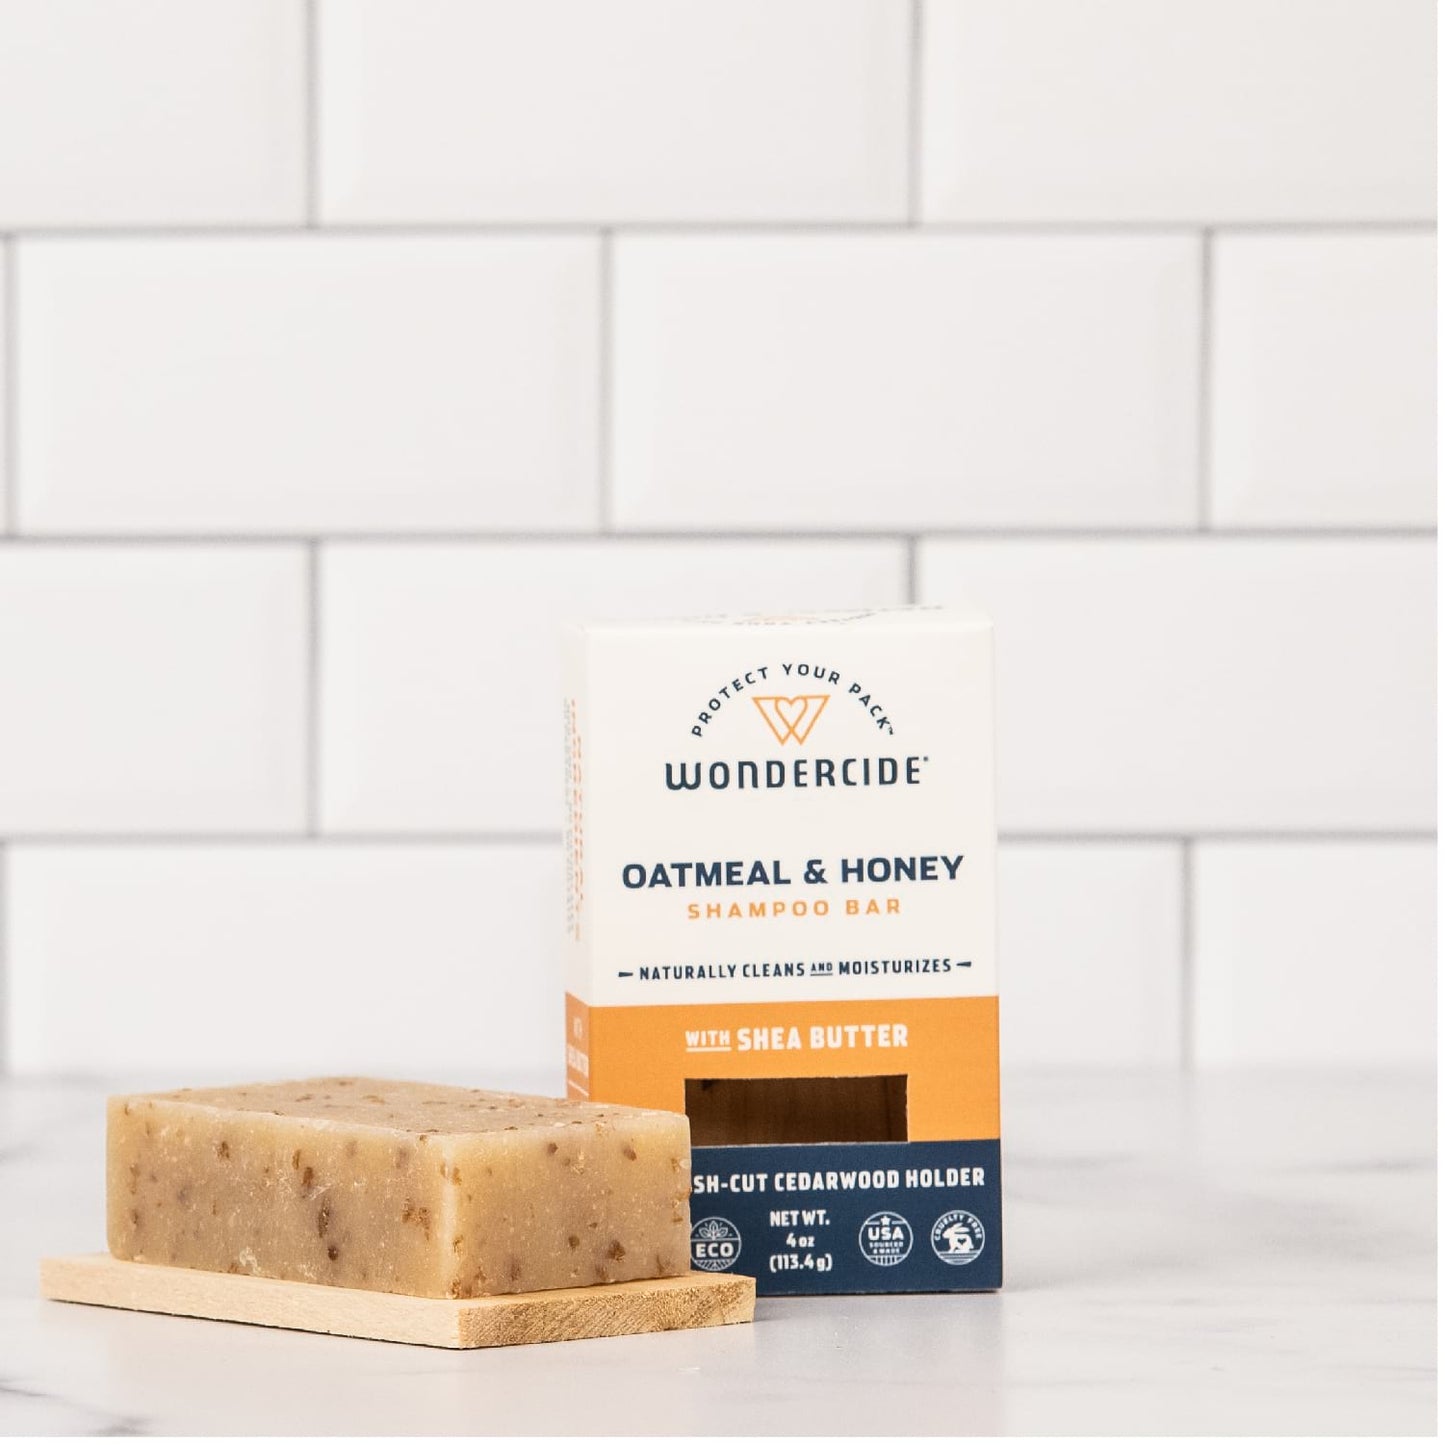 Oatmeal & Honey Shampoo Bar for Dogs and Cats - Gallery